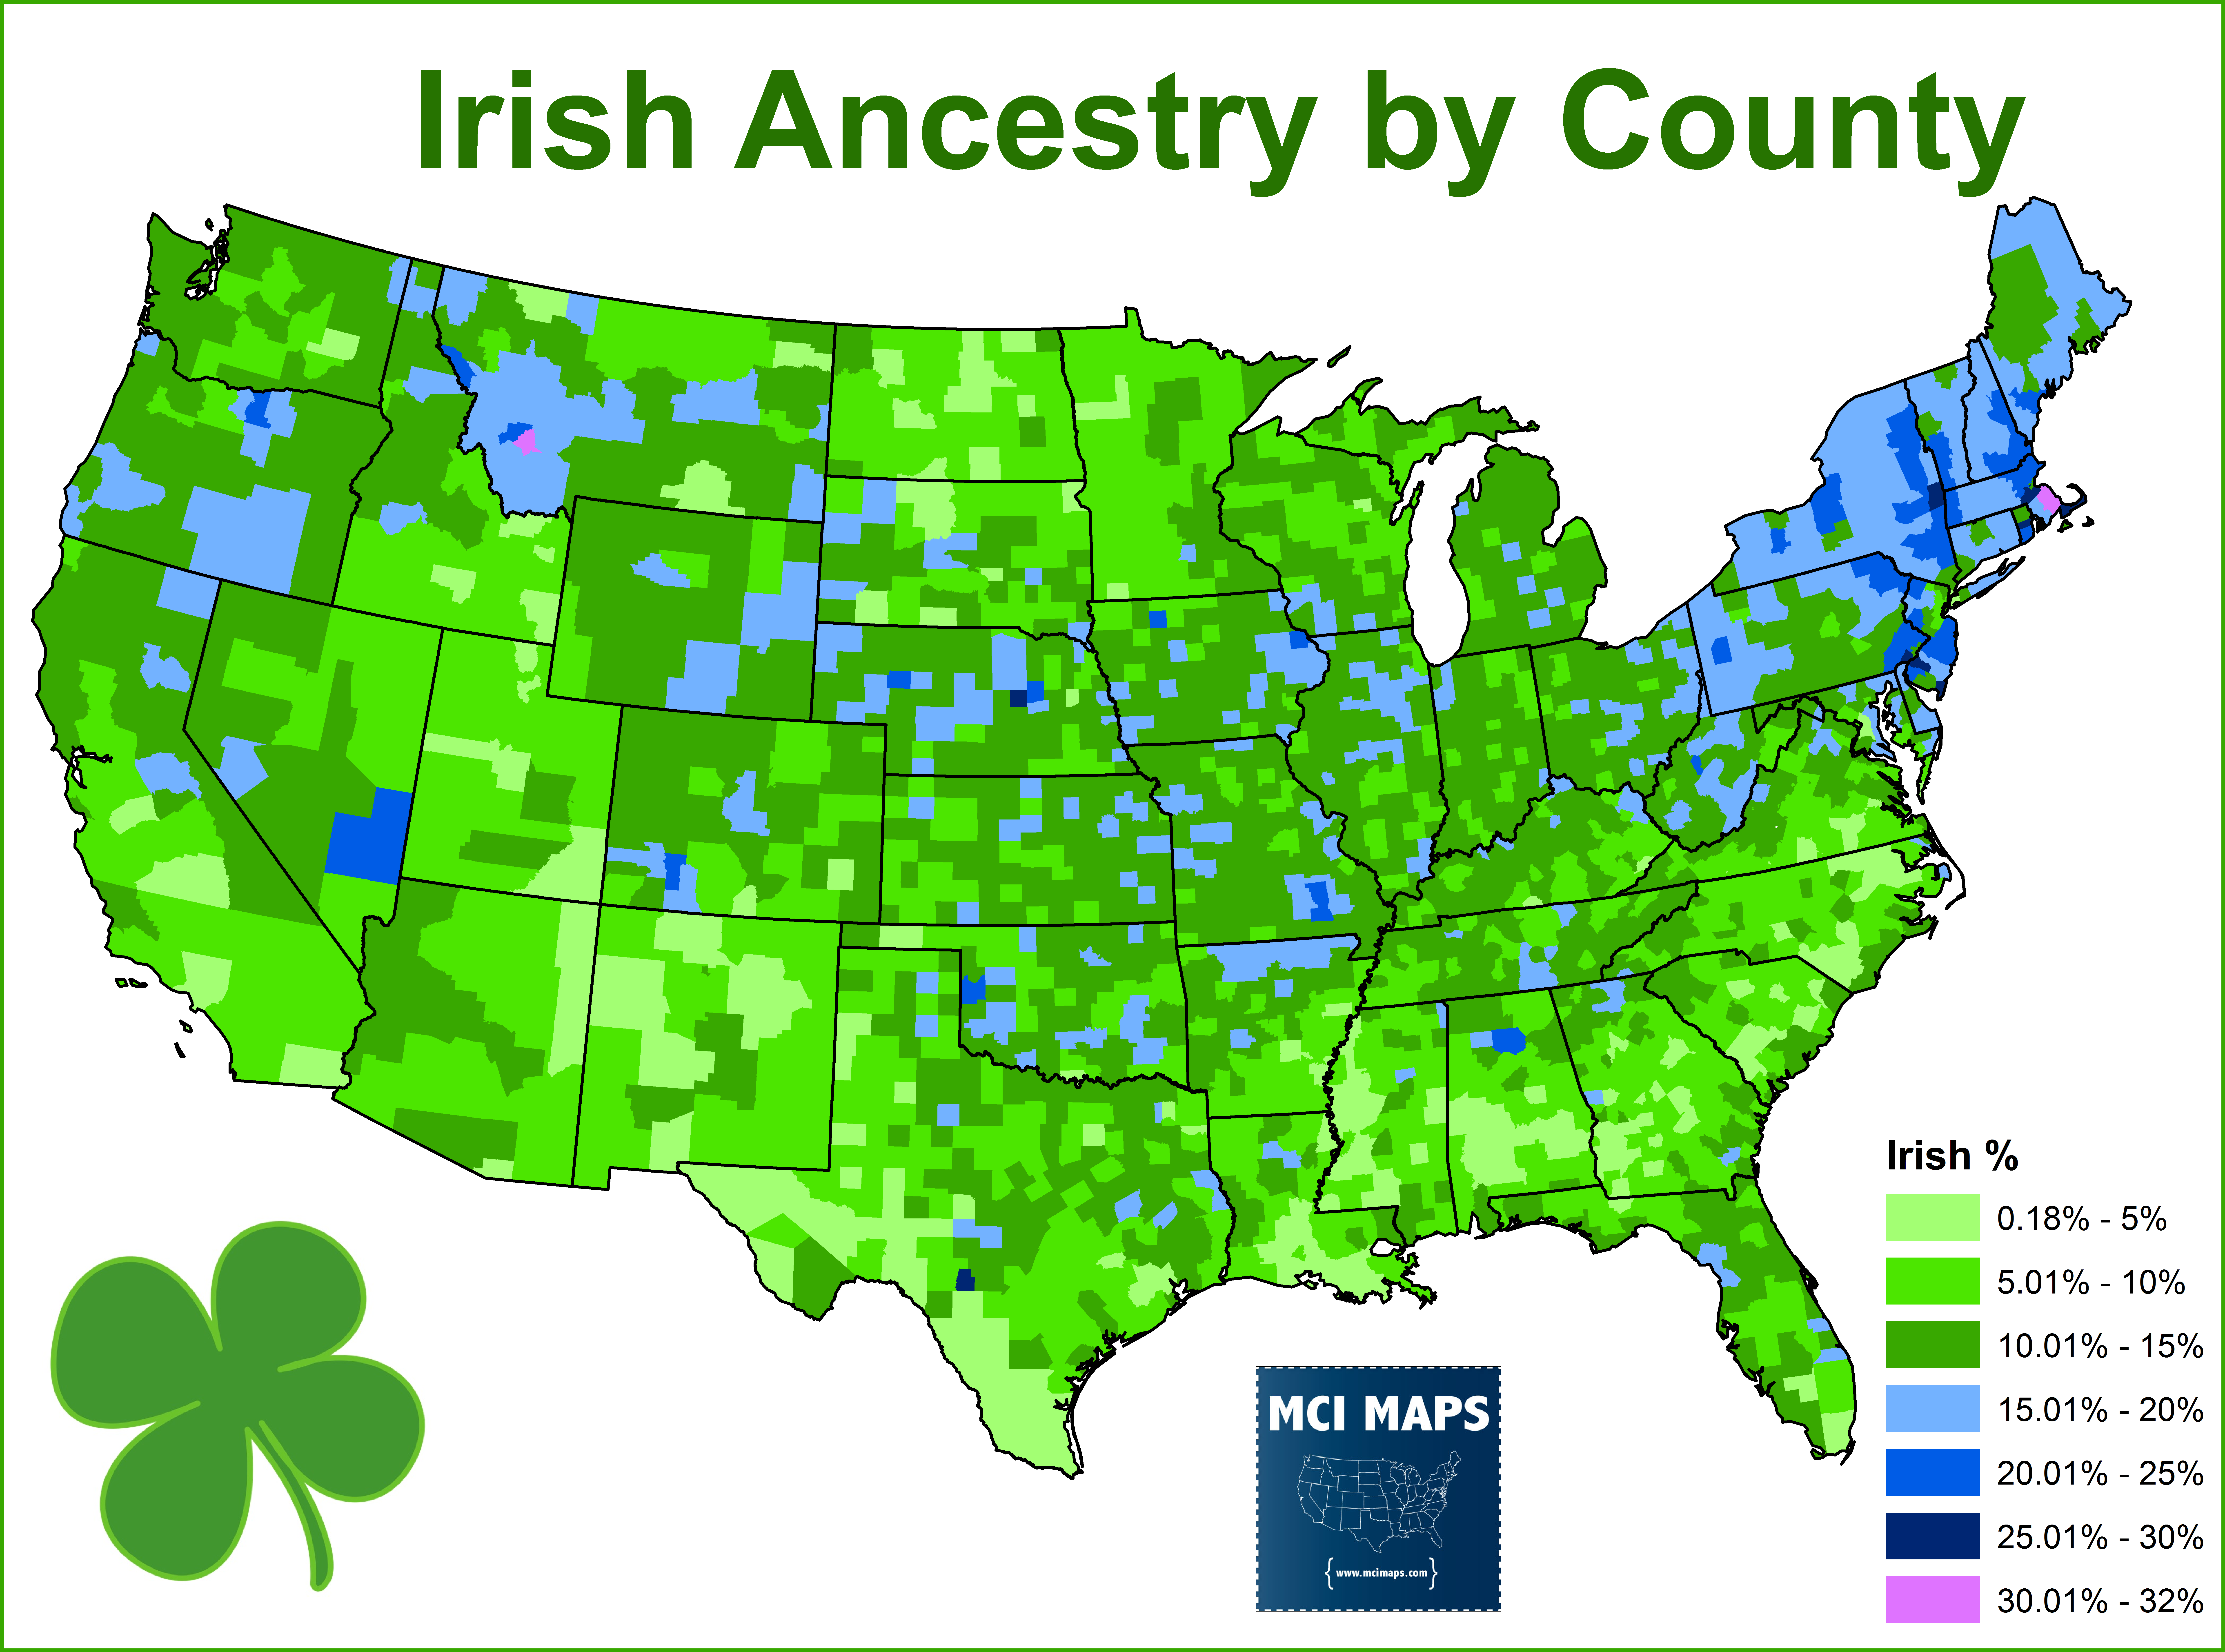 Geography of Irish Ancestry in American.